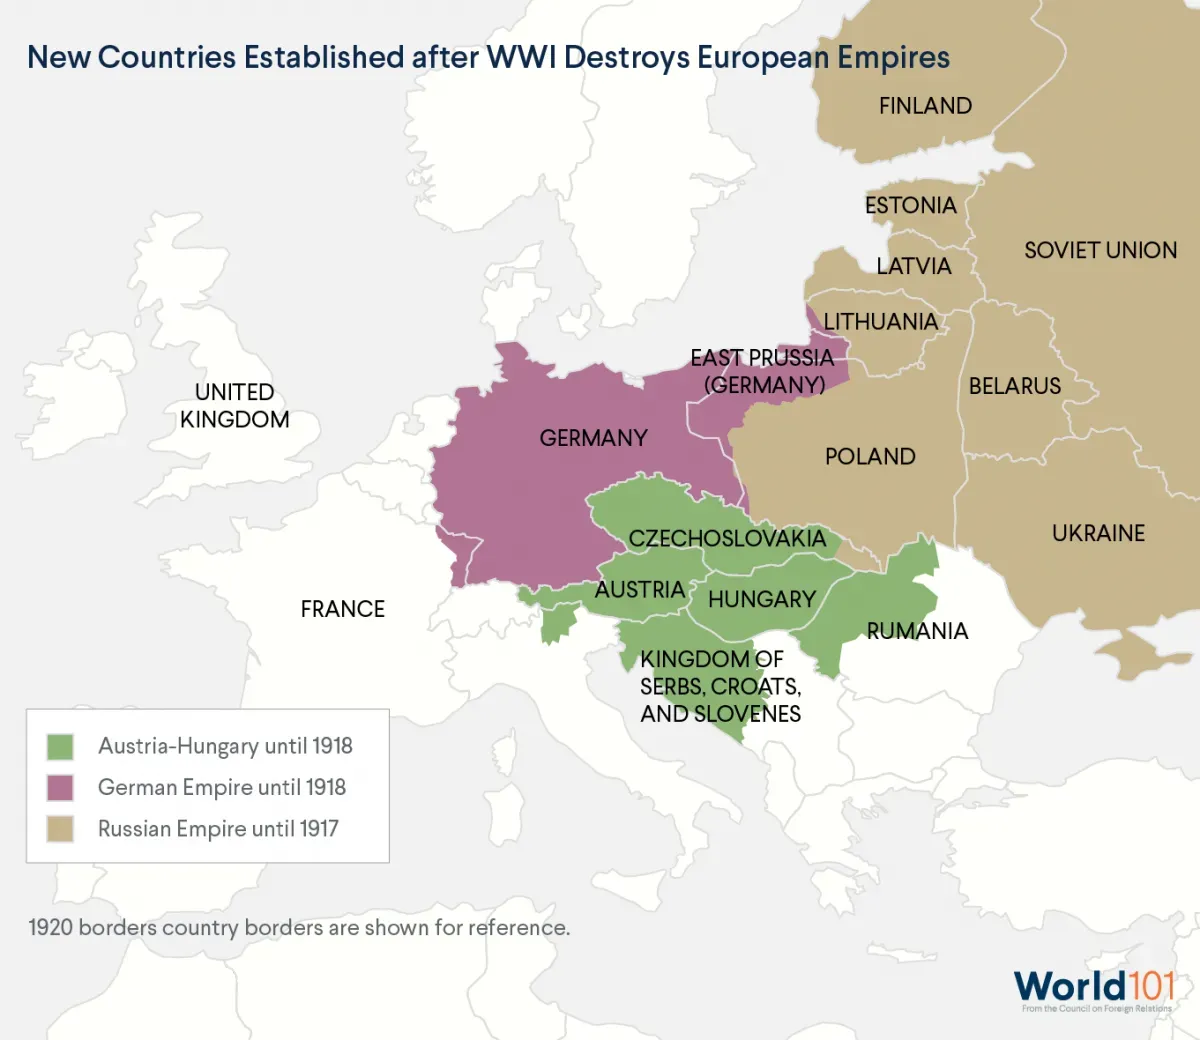 Map of new European countries that were established after World War One destroyed the Russian, German, and Austro-Hungarian empires. For more info contact us at world101@cfr.org.